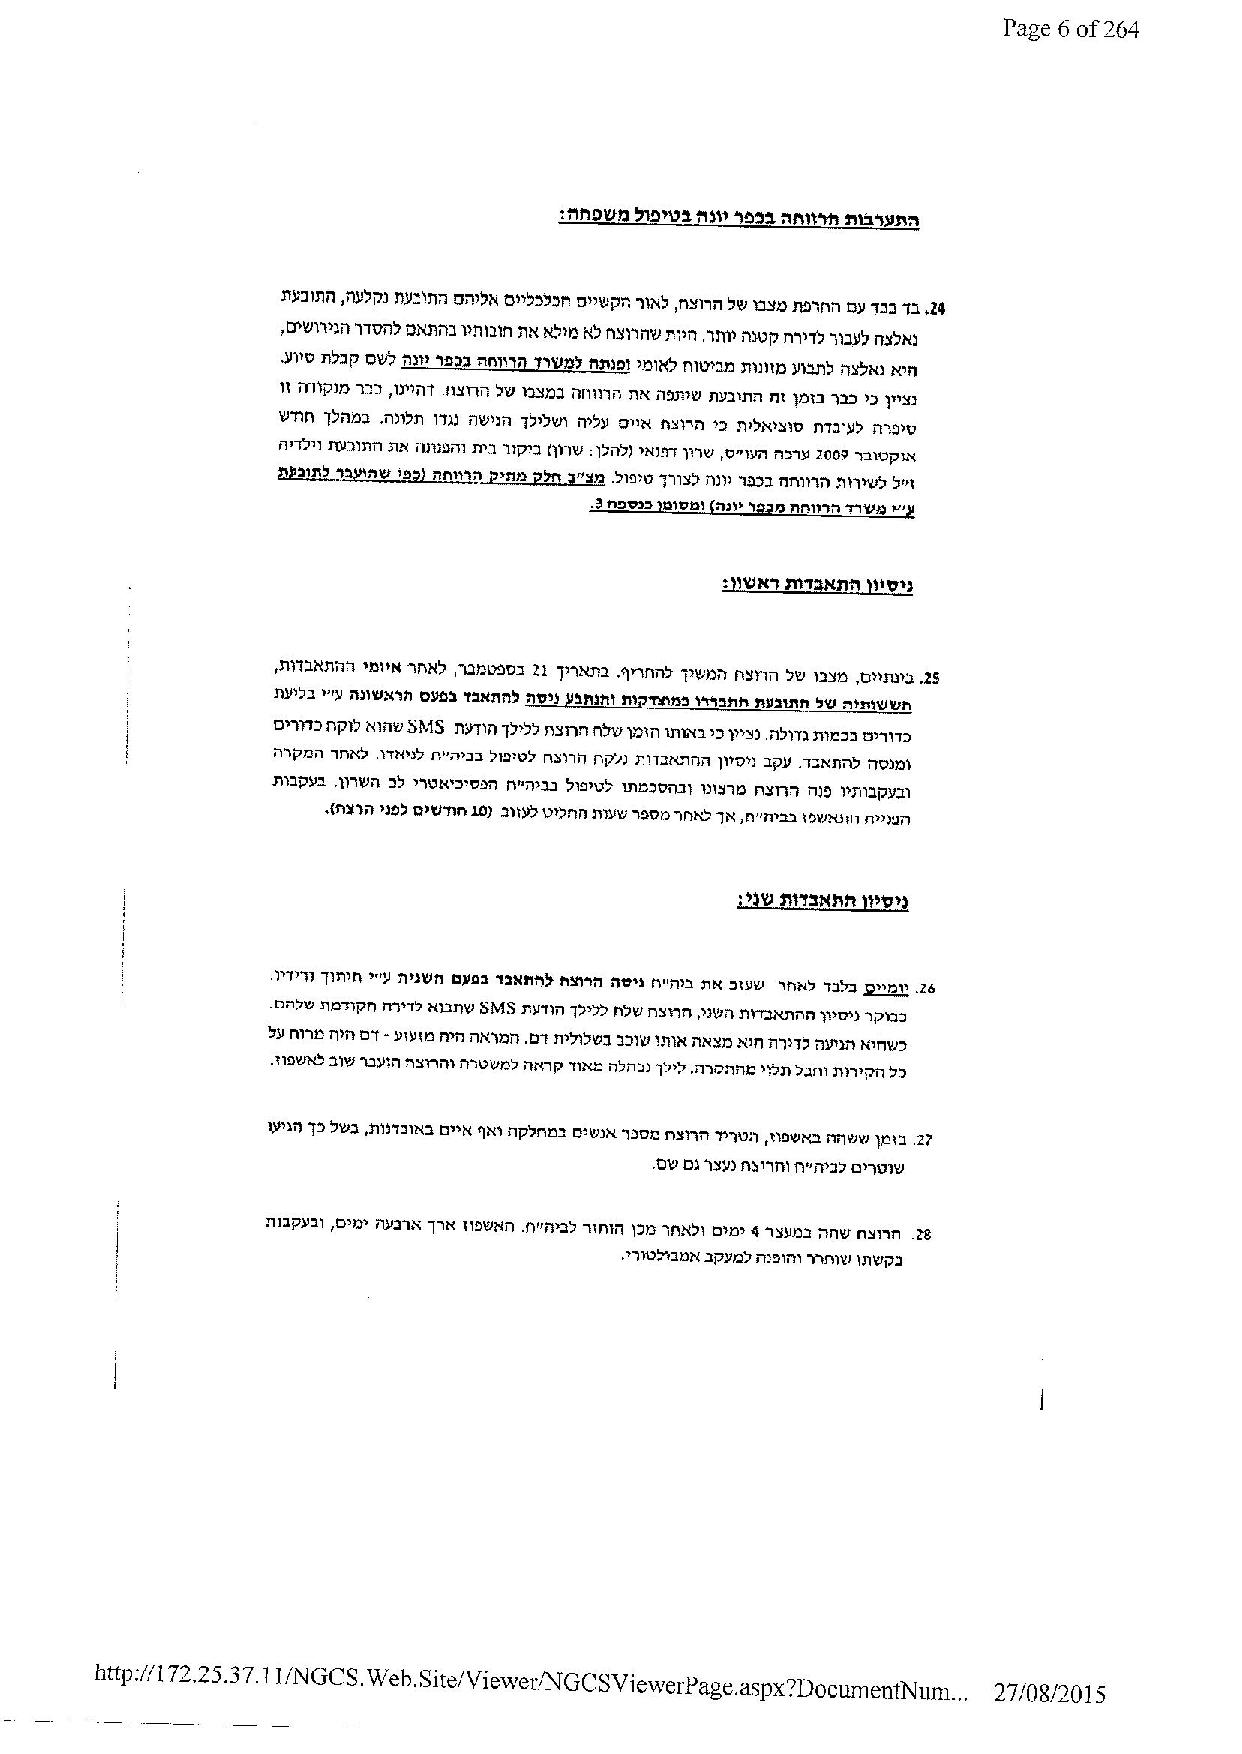 document-page-006